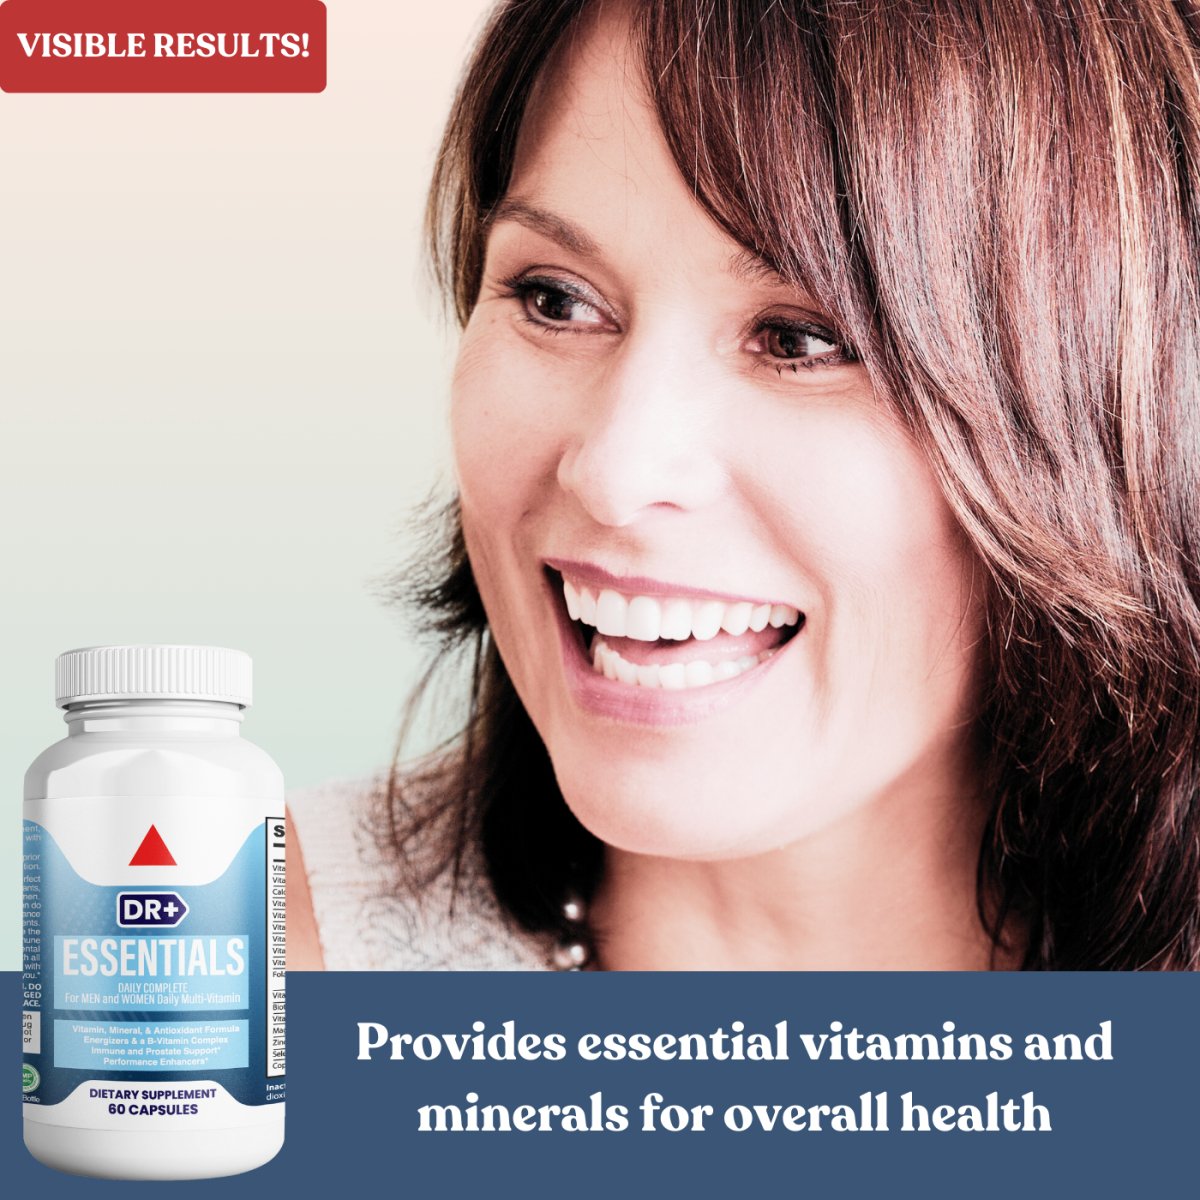 Daily Complete Multivitamin Mineral Daily Multi - Essential Vitamins & Minerals for Health & Vitality| 60 Capsules